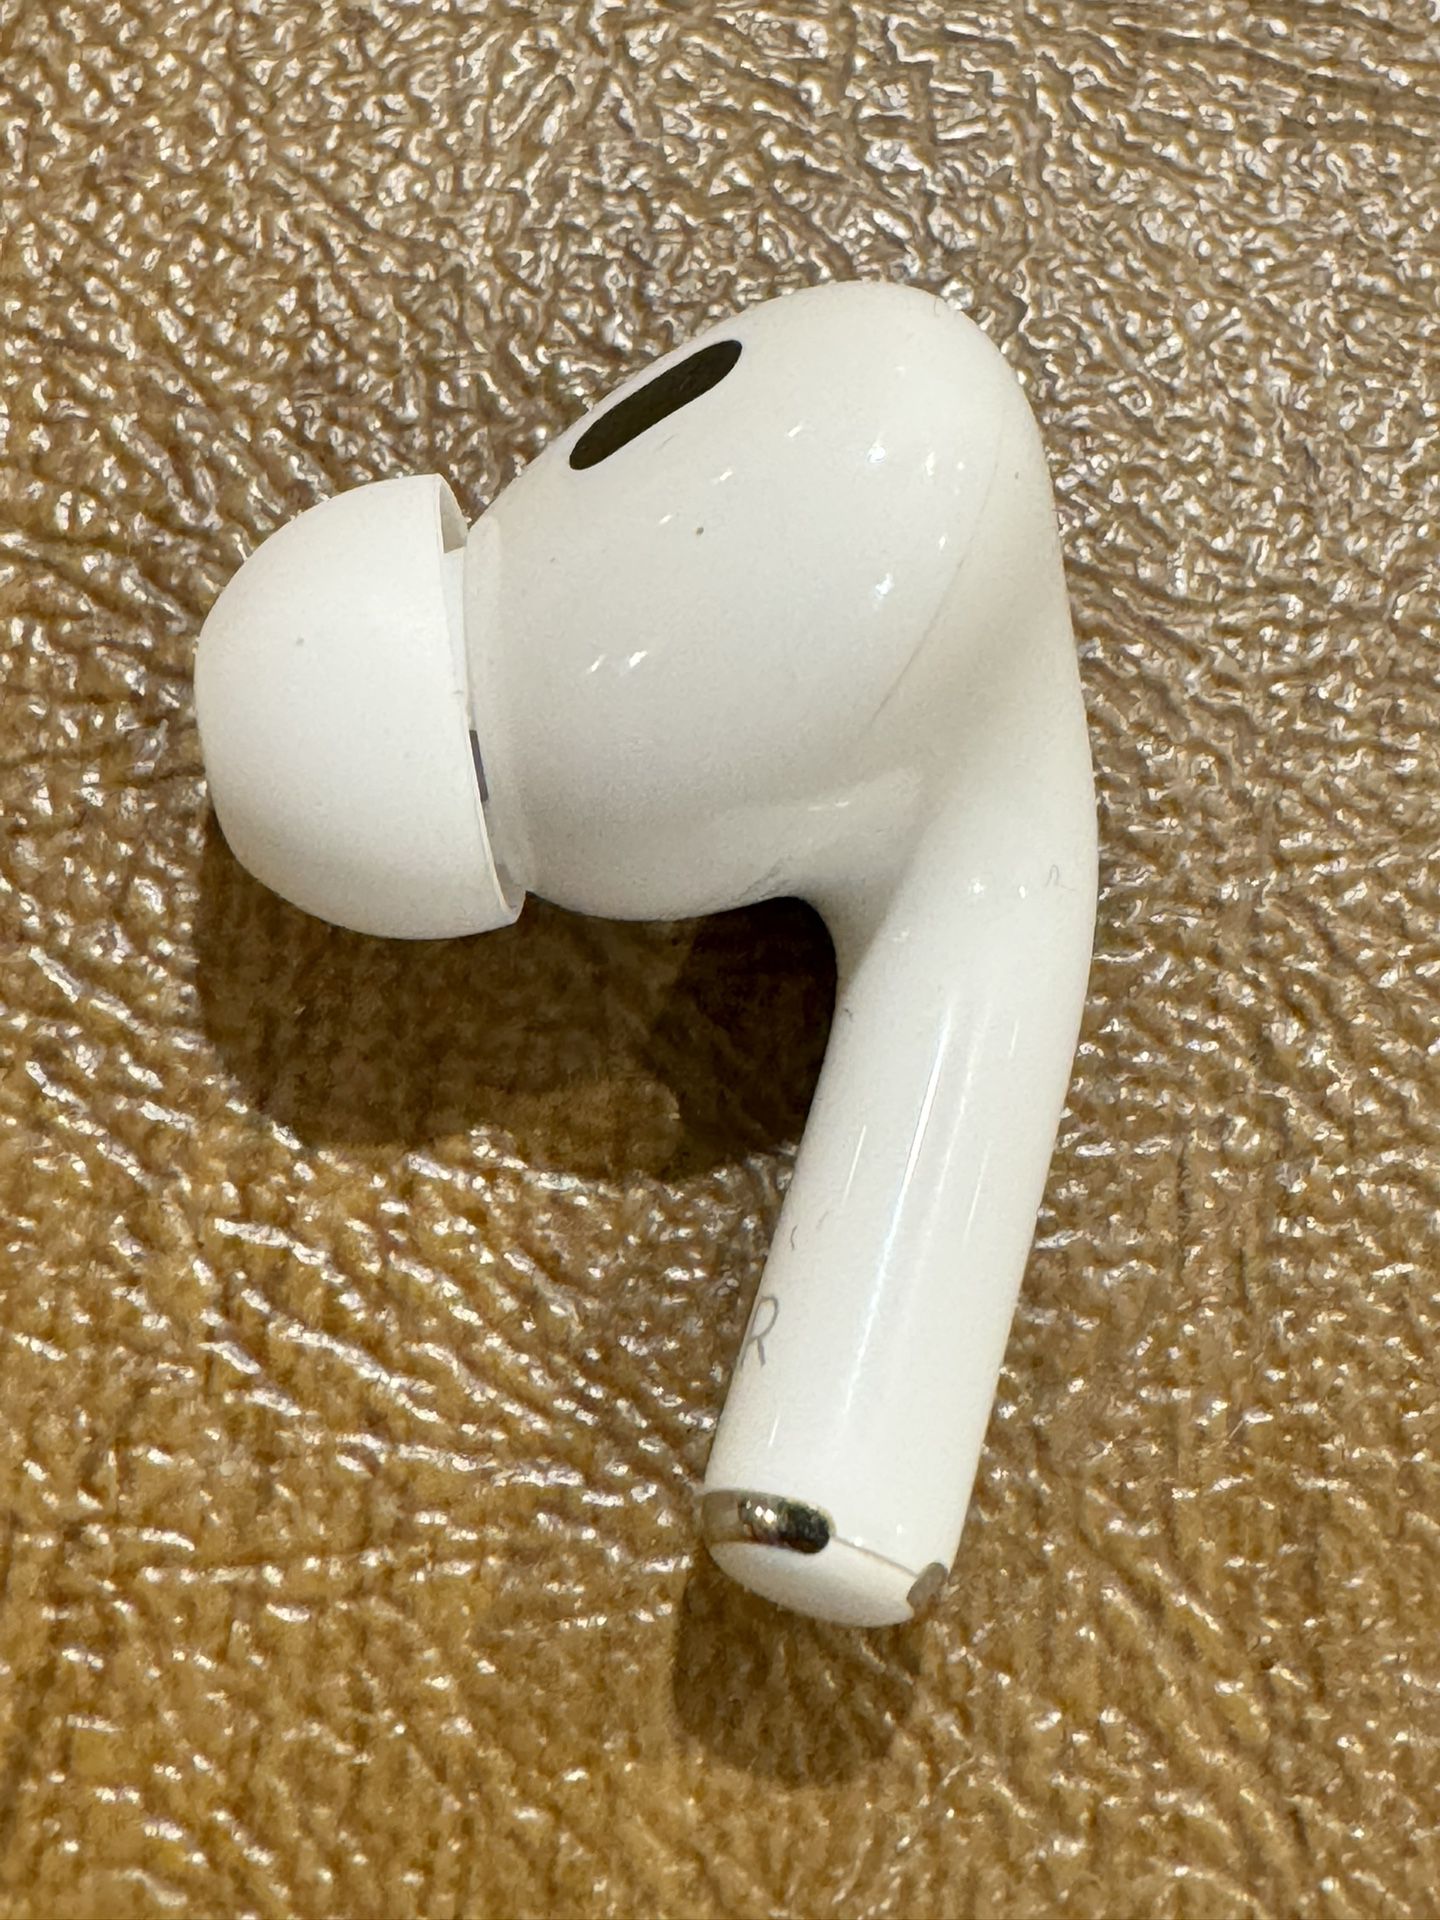 Apple AirPods 2nd Generation A2032 Left Earbud - White